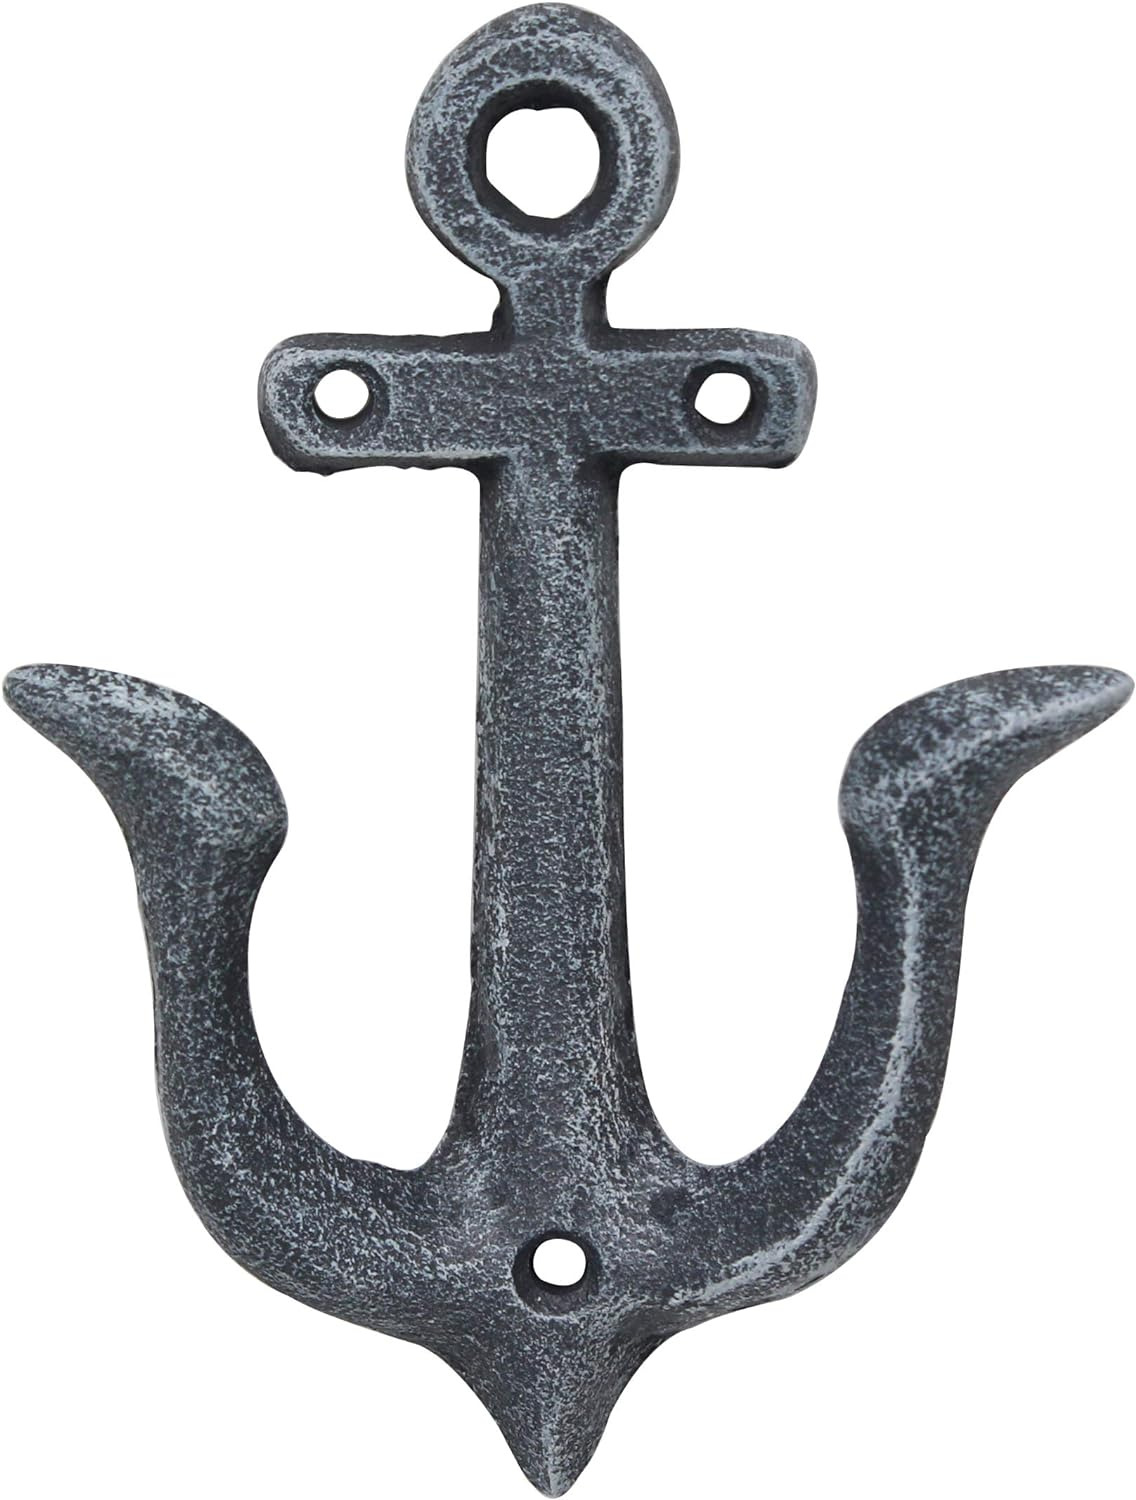 Antique Pewter Silver Cast Iron Anchor Double Wall Hook, Rustic Nautical Design,